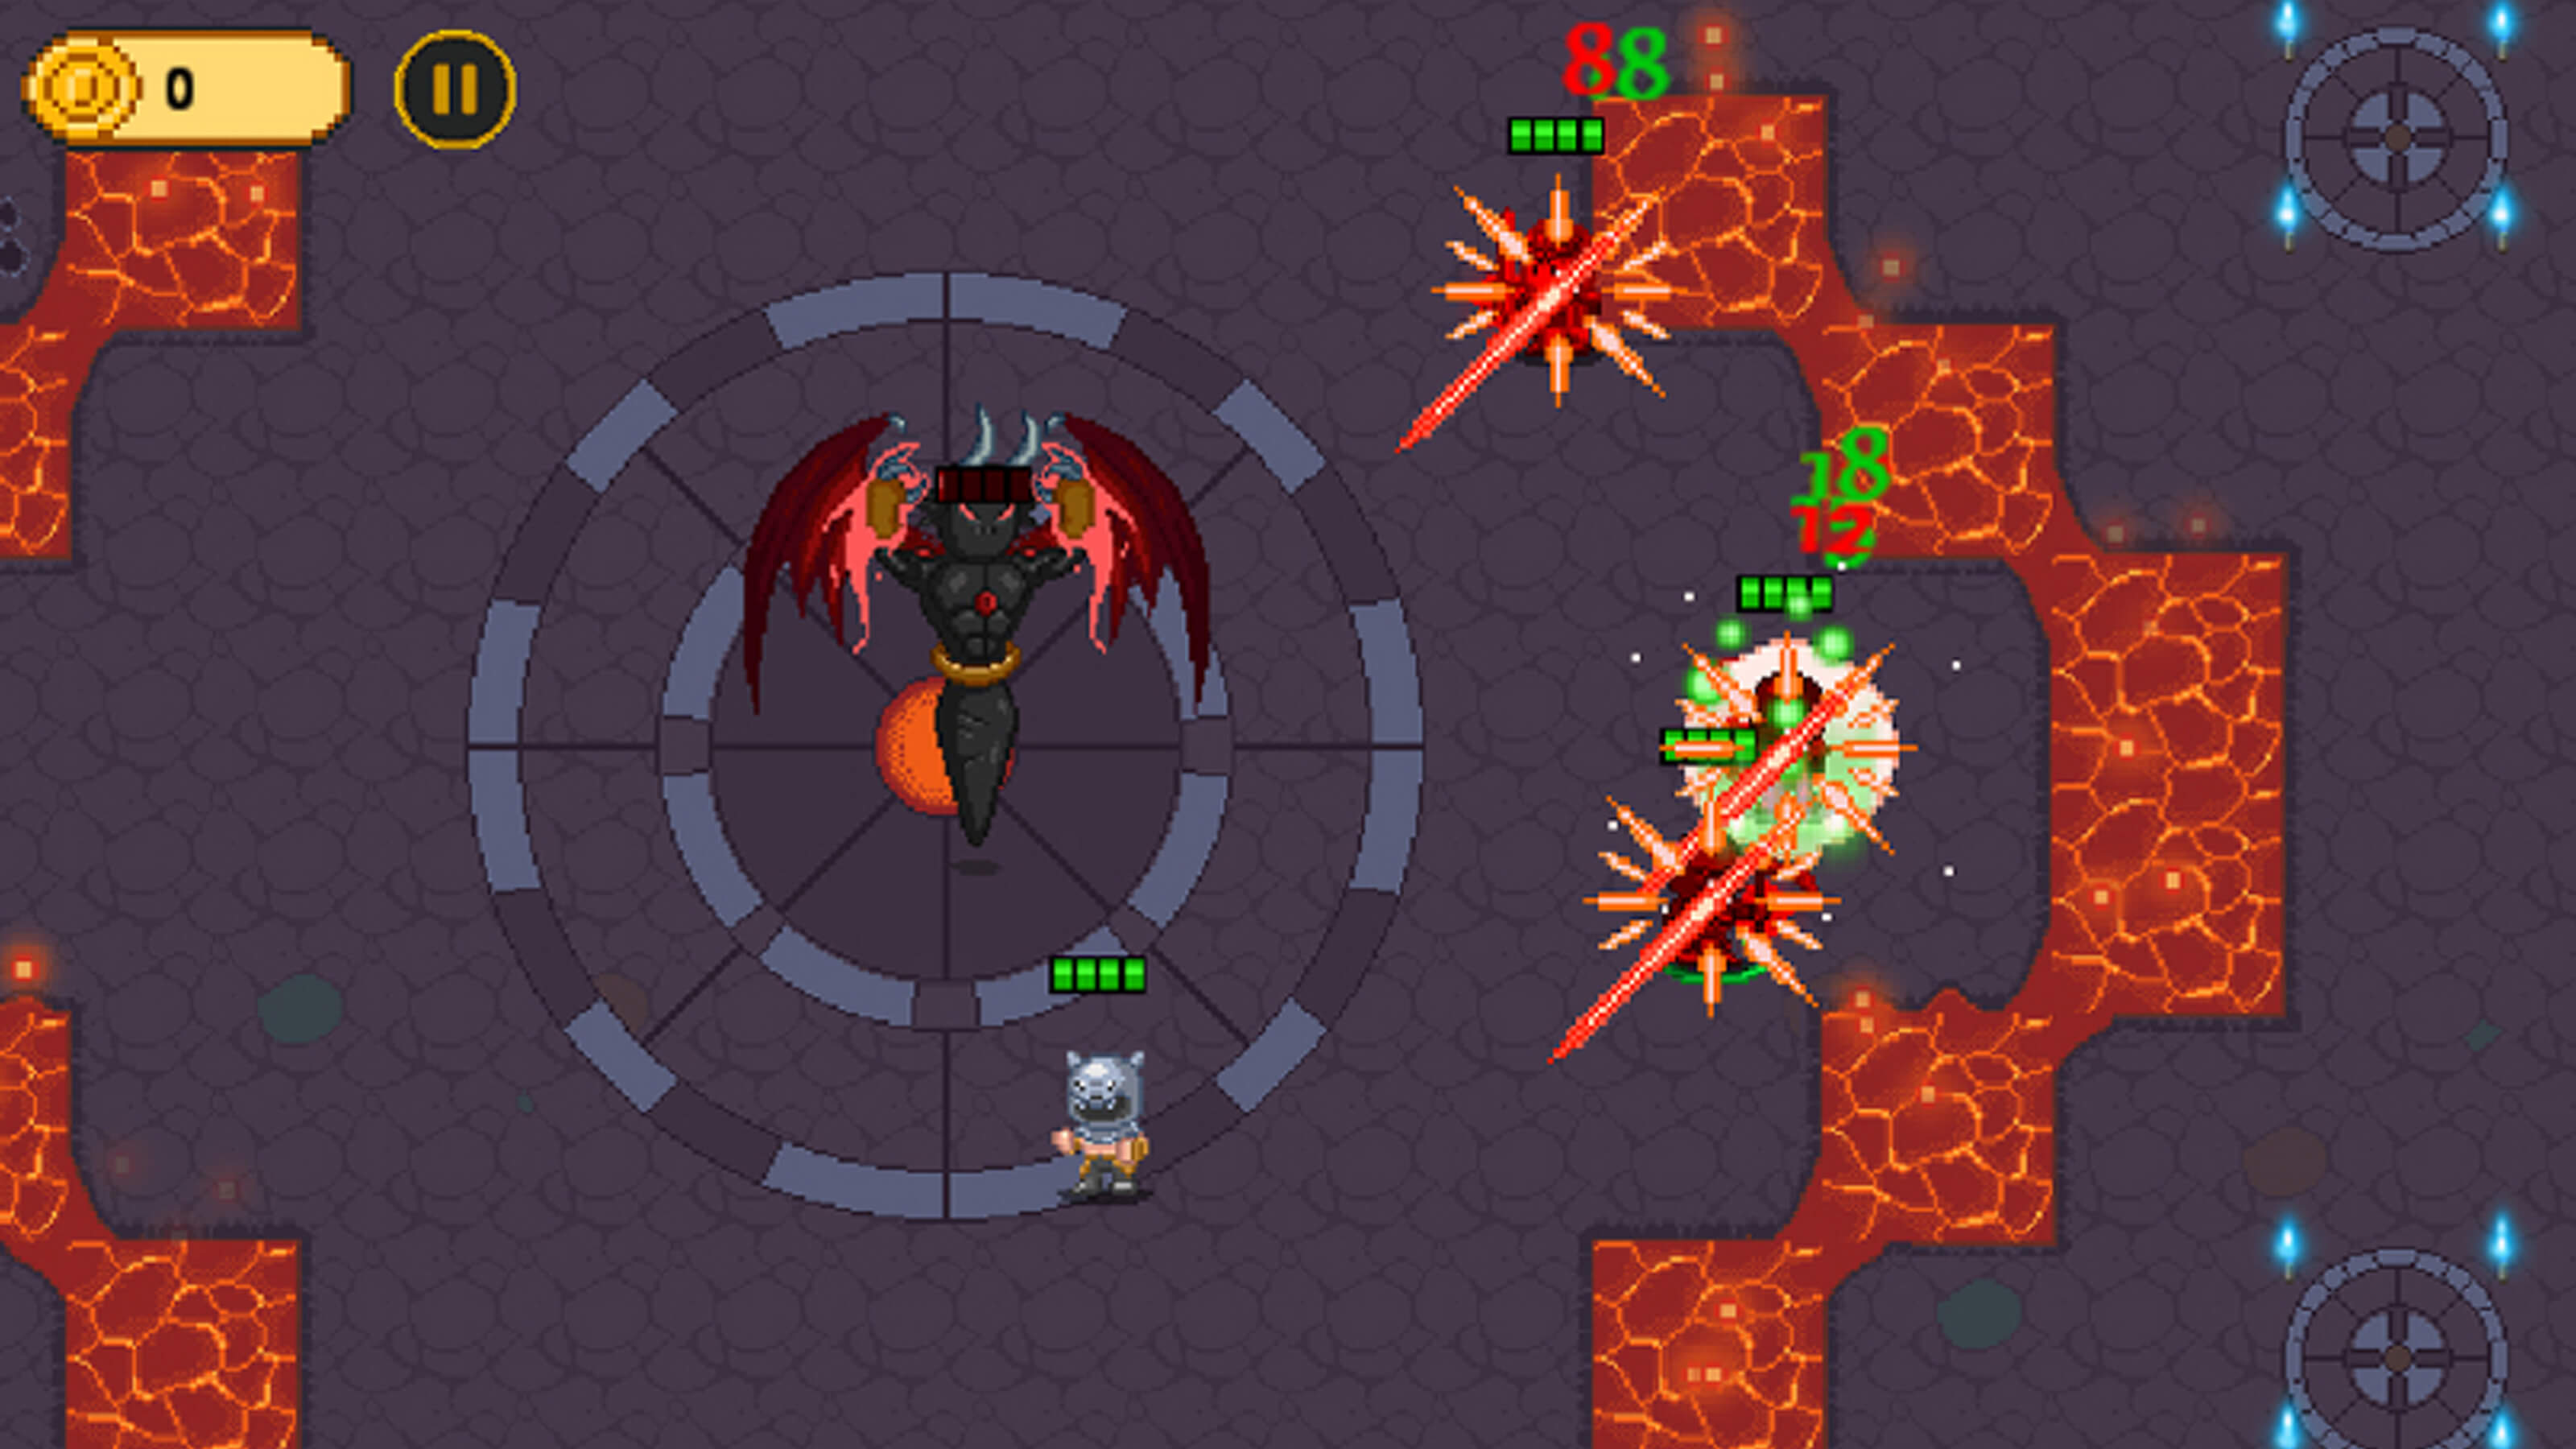 The player's character fights a black, winged demonic enemy in a dark, lava-filled dungeon 